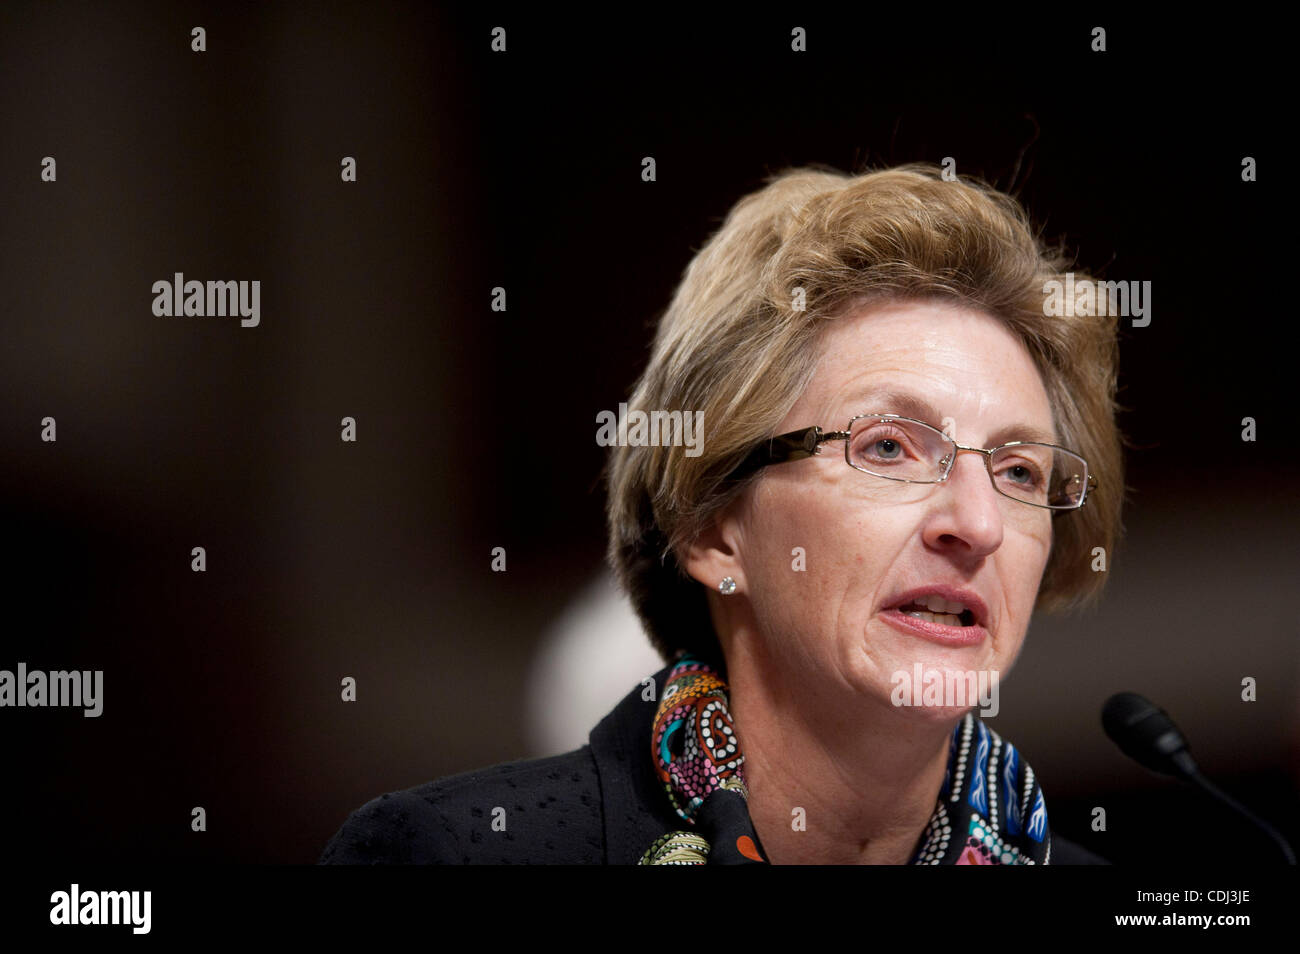 Feb 15, 2011 - Washington, District of Columbia, U.S. - Dr. JO ANN ROONEY testifies before a Senate Armed Services Committee Hearing her nomination to serve as Principal Deputy Undersecretary of Defense for Personnel and Readiness. (Credit Image: © Pete Marovich/ZUMAPRESS.com) Stock Photo